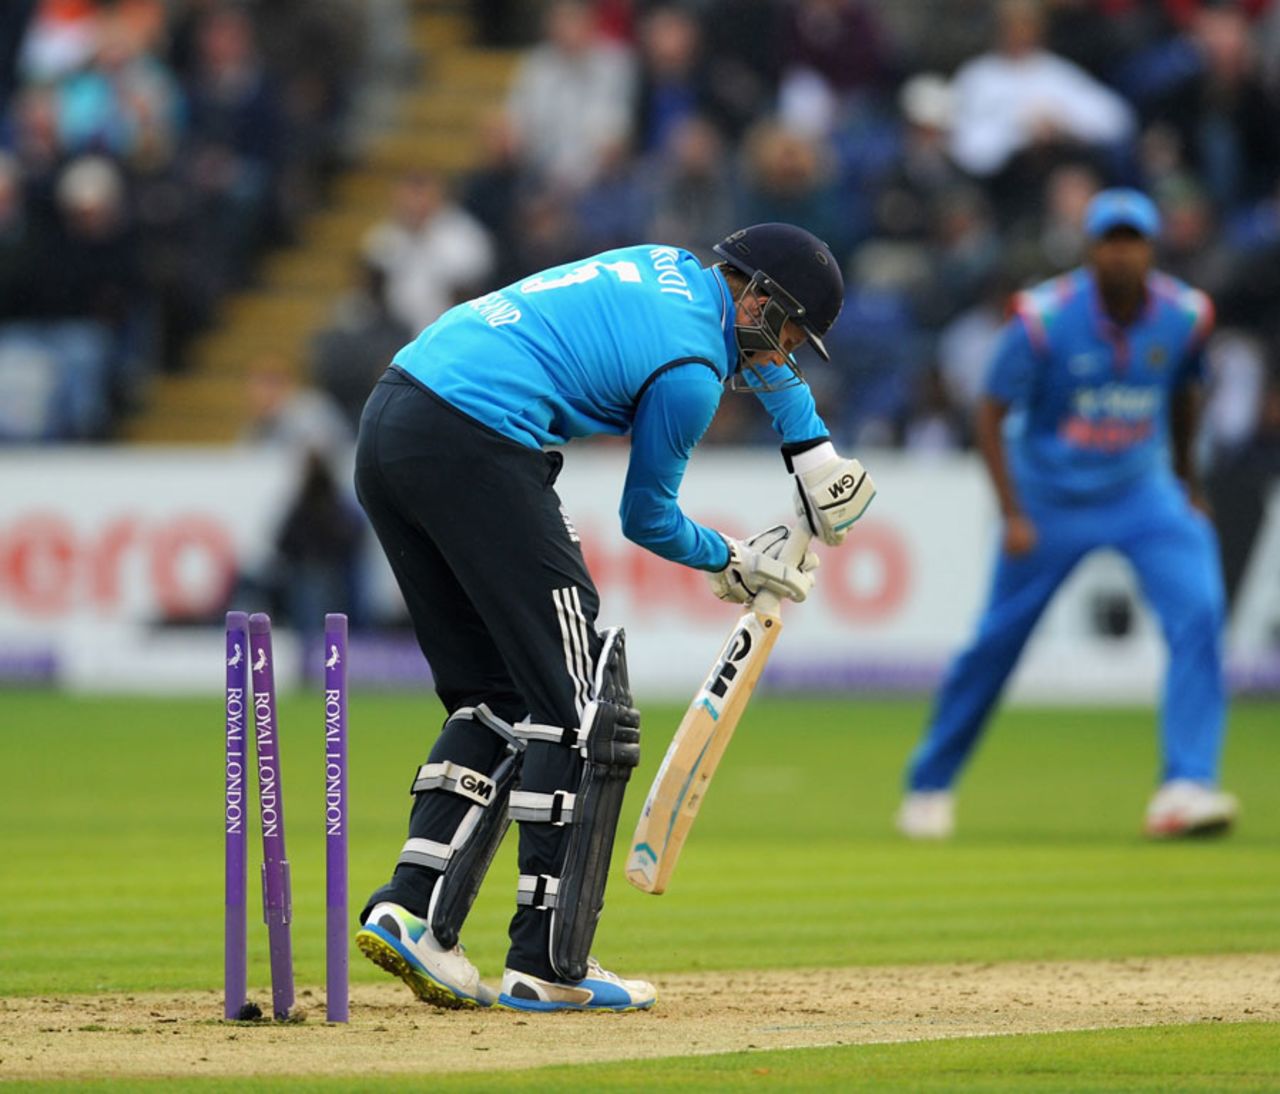 Joe Root had no answer to Bhuvneshwar Kumar's back-of-a-length delivery, England v India, 2nd ODI, Cardiff, August 27, 2014